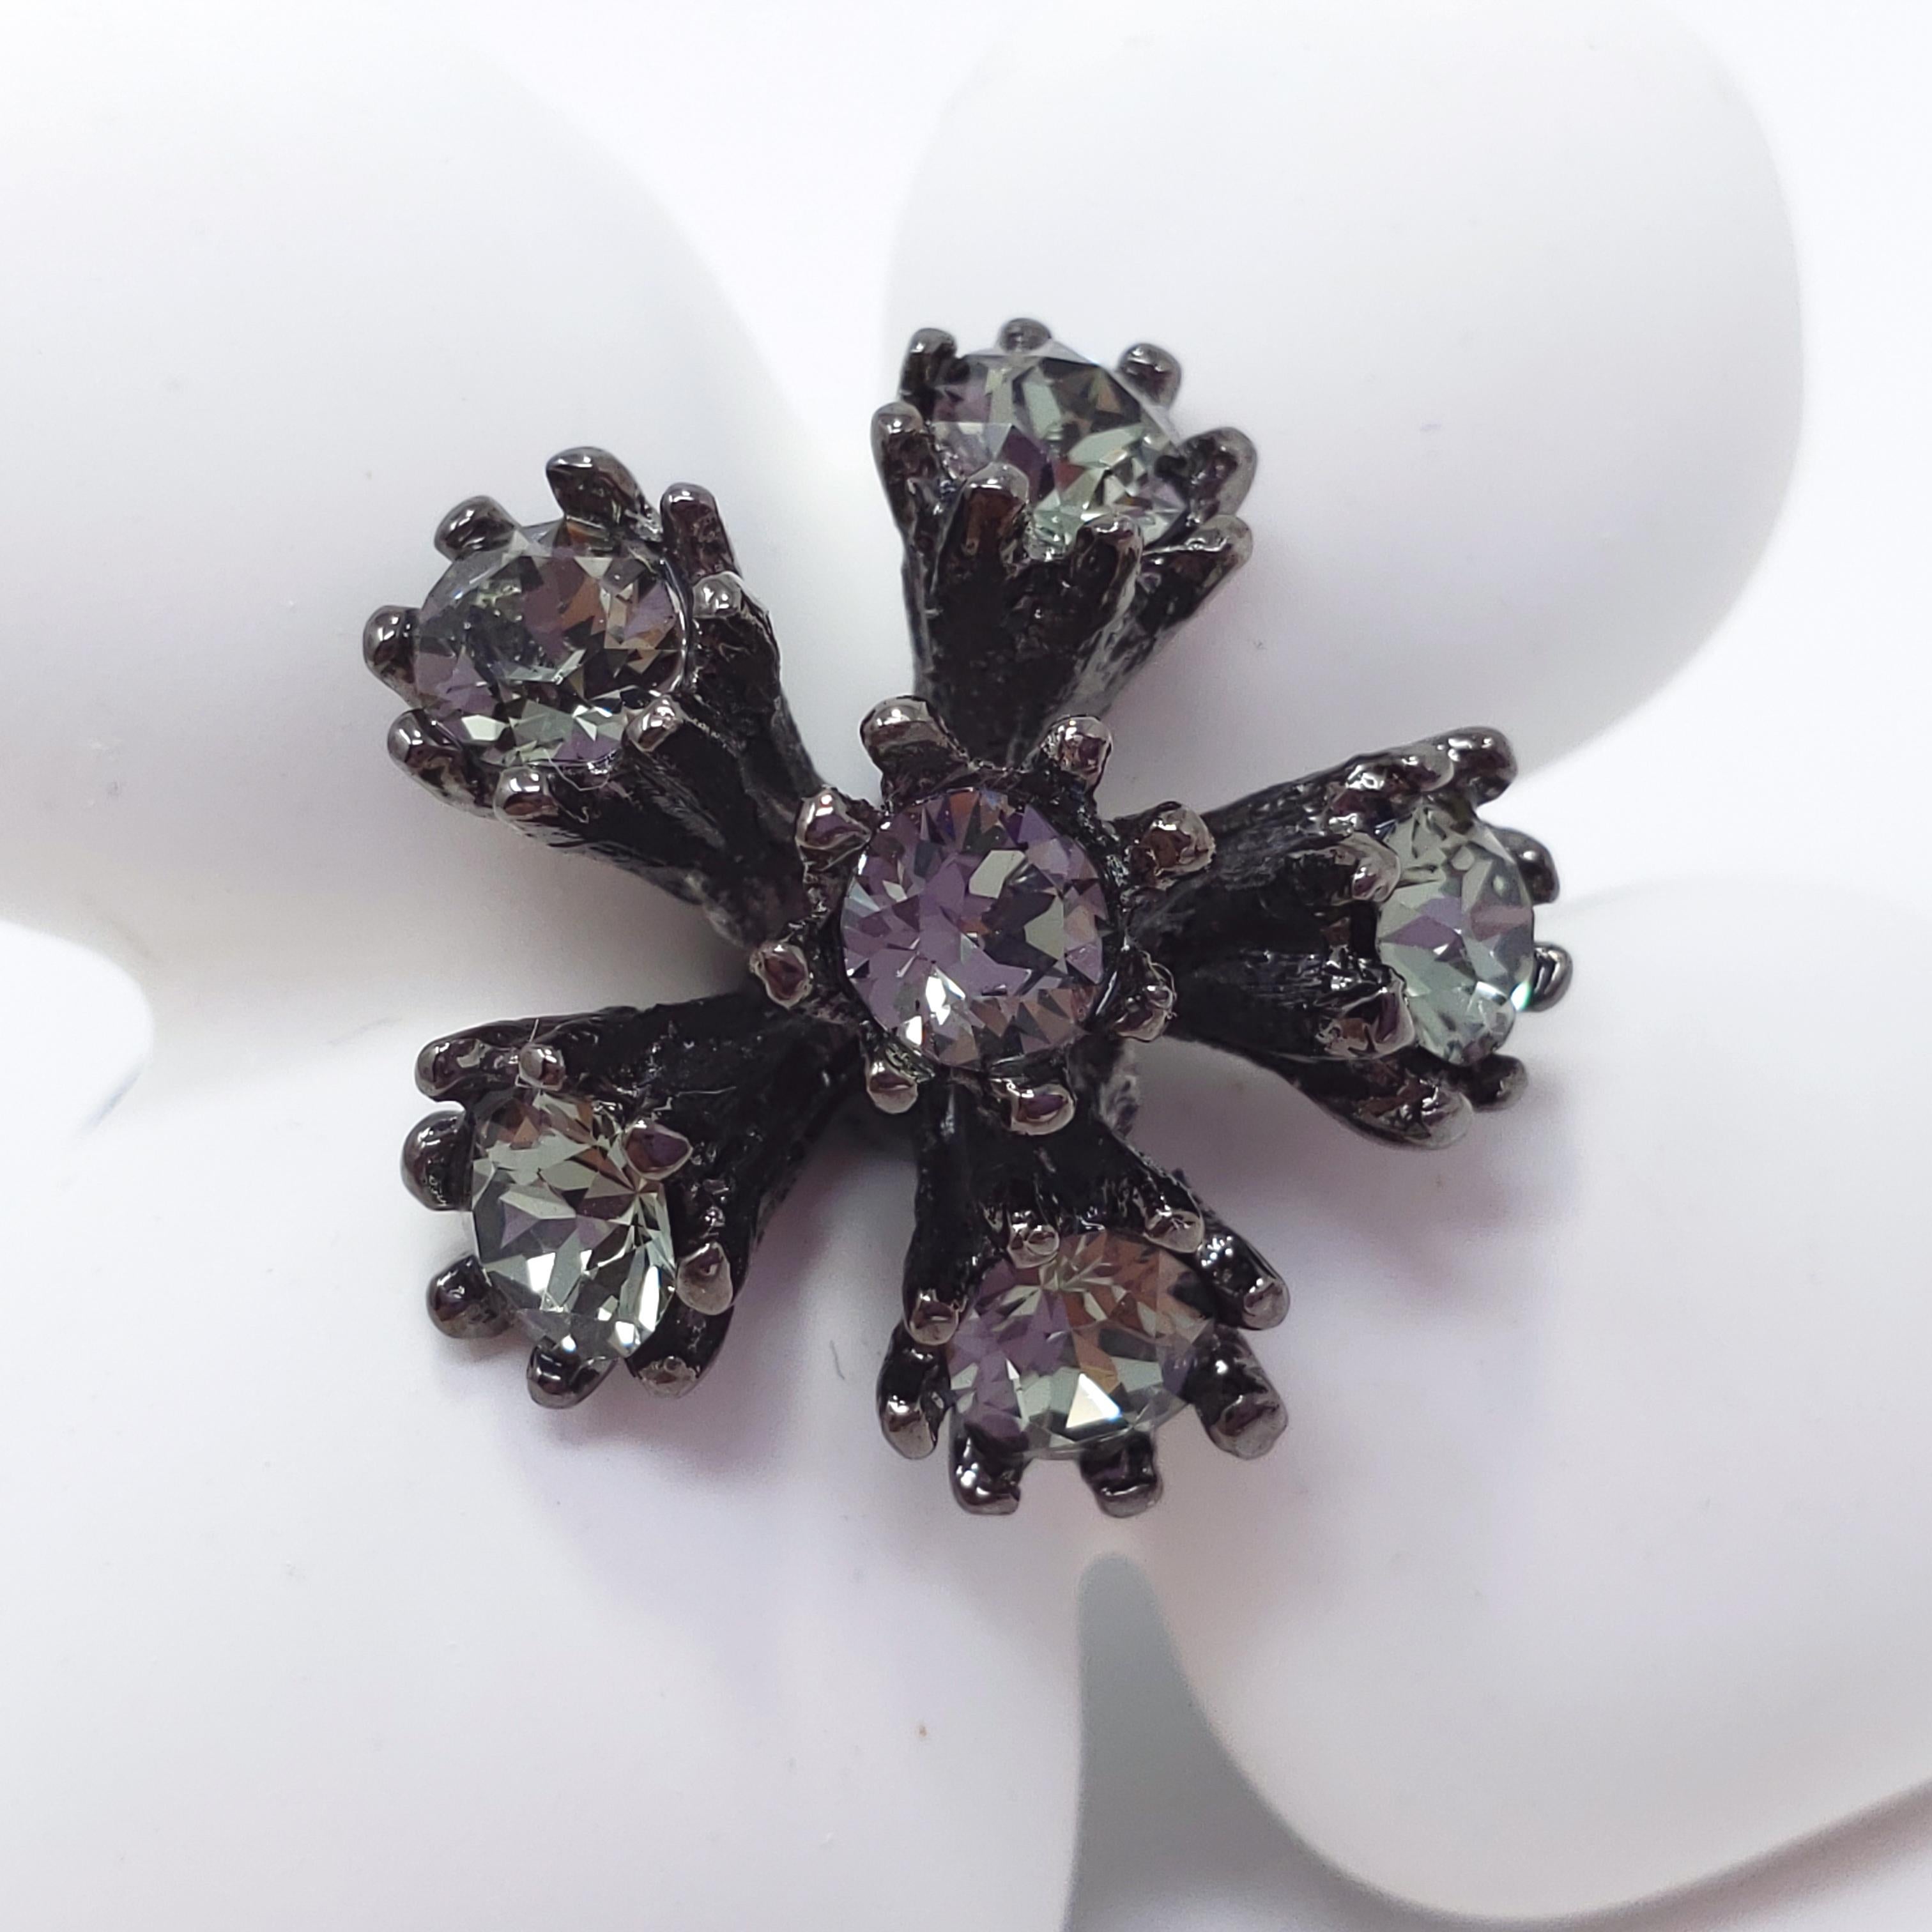 A grapefruit flower ring by Oscar de la Renta. Feature white resin petals accented with gray crystals on a textured dark gray brass setting.

Size: Adjustable, US sizes 4-8
Flower height approx 1.5 inches
Hallmarks: Oscar de la Renta, Made in